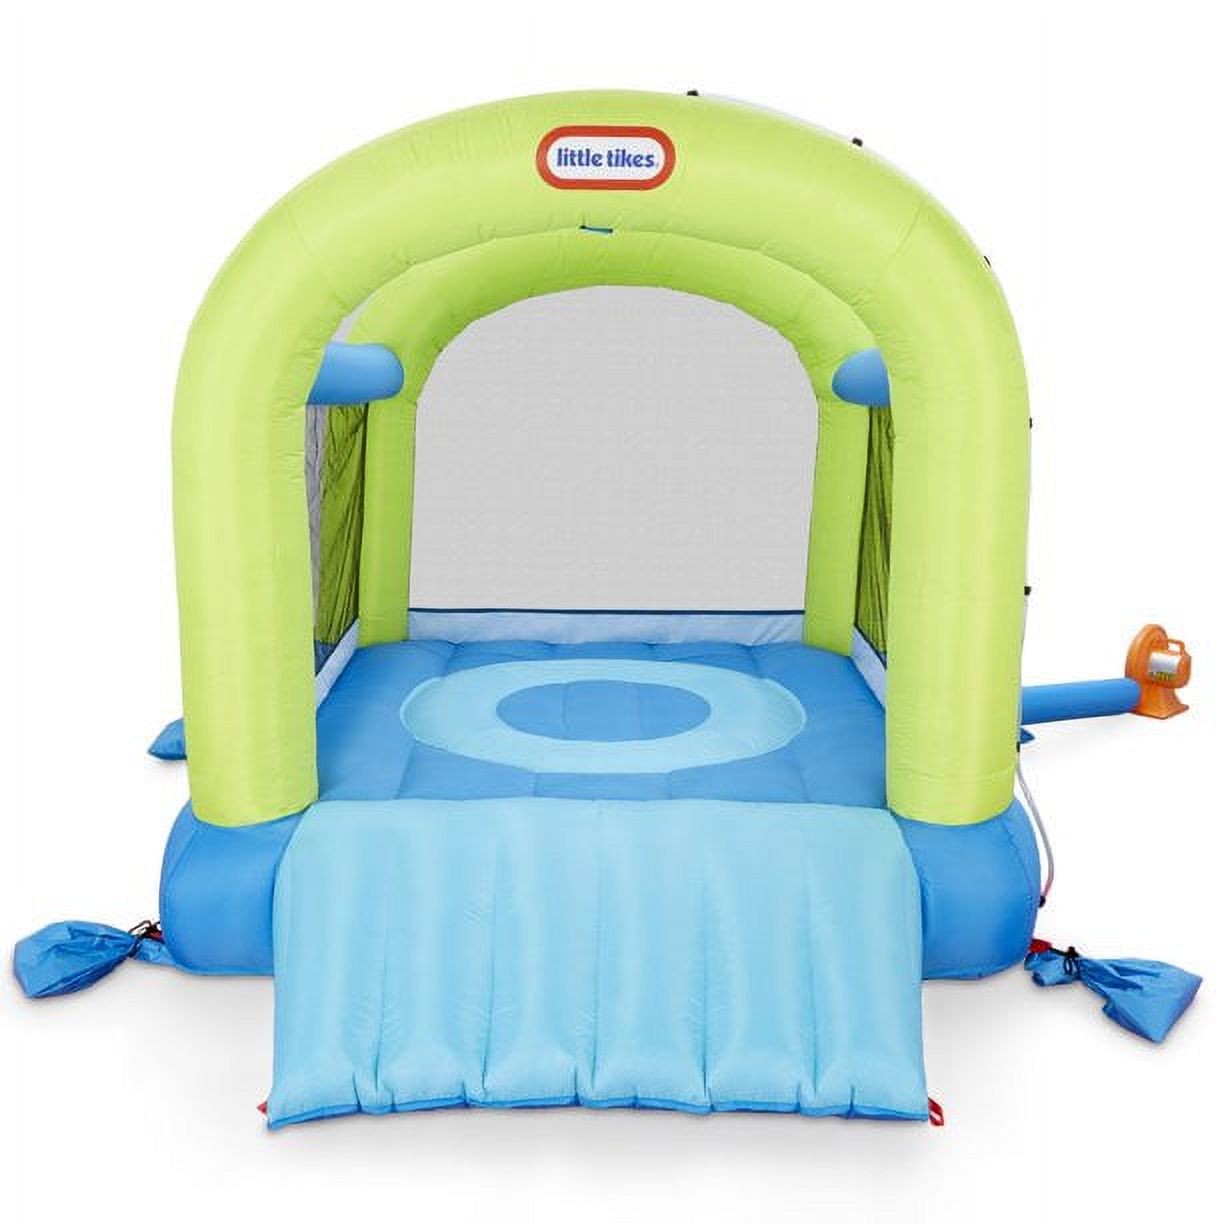 Little Tikes Splash n' Spray Outdoor Indoor 2-in-1 Inflatable Bounce House with Slide, Water Spray and Blower, Fits 2 Kids, Backyard Toy For Boys Girls Ages 3-8 Years - image 3 of 7